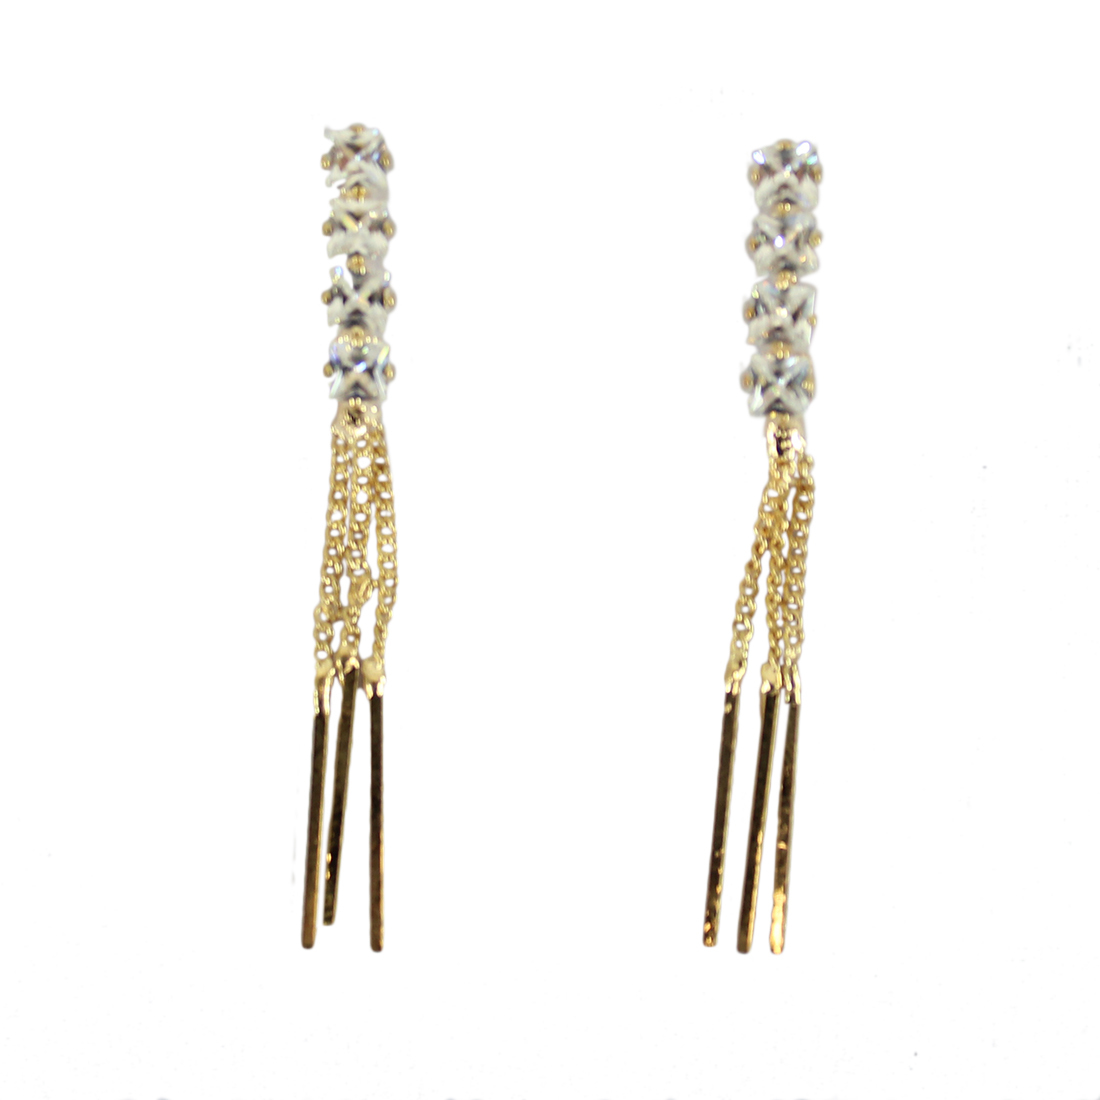 Dangle earrings with diamonds and hanging chains